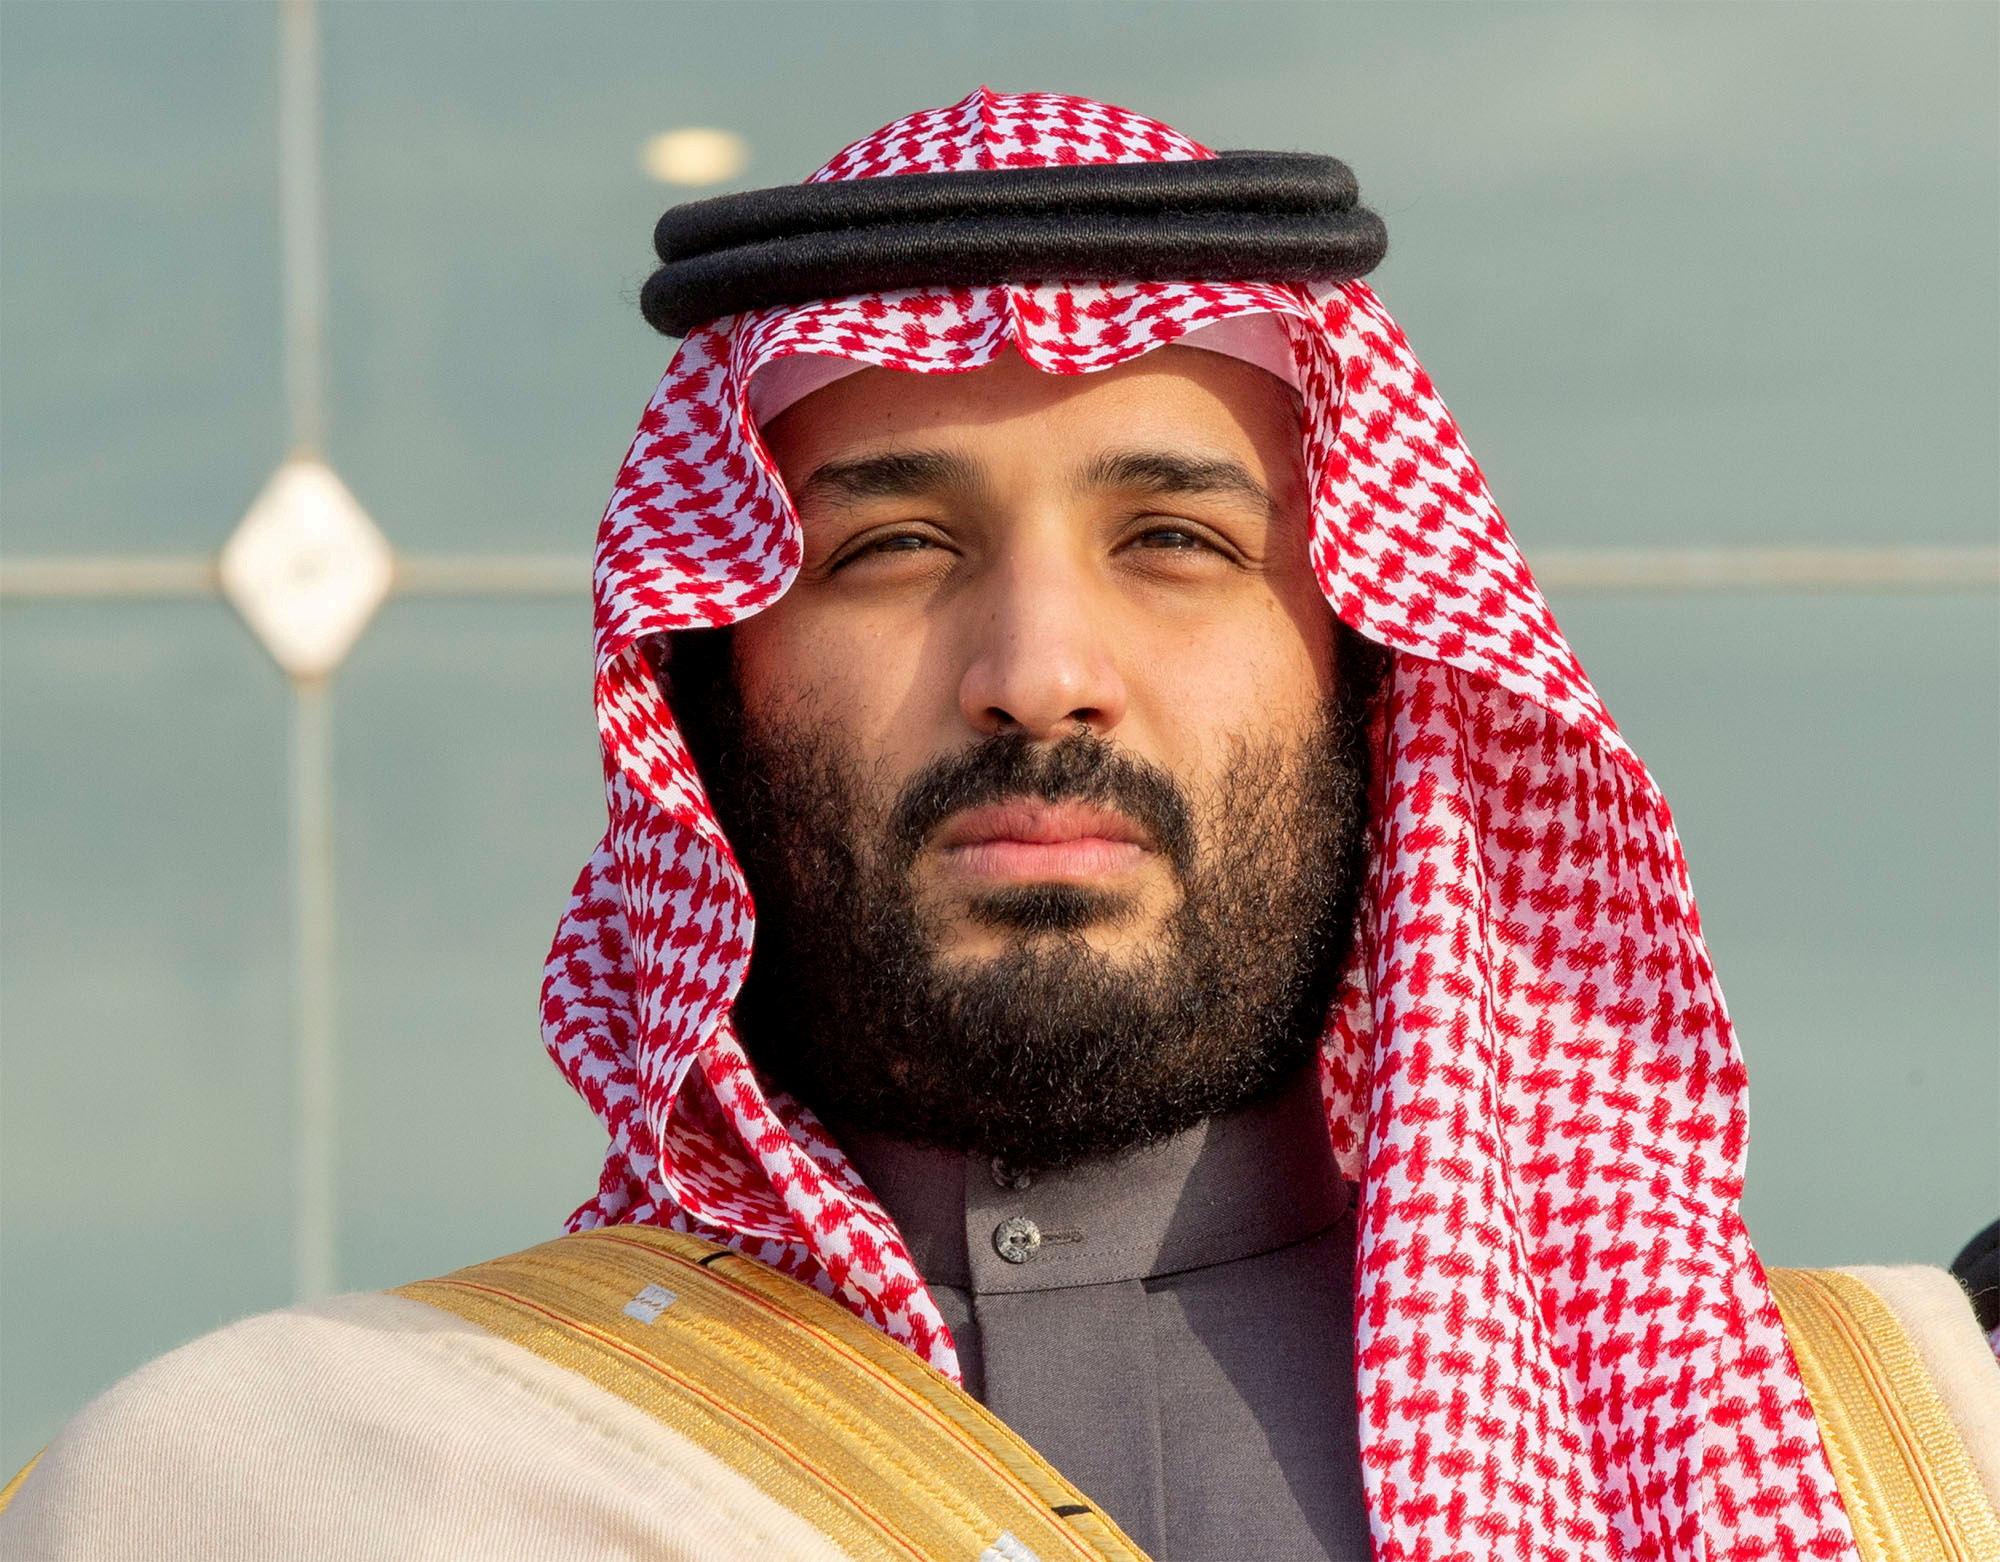 Saudi Arabia's Crown Prince Mohammed bin Salman attends a graduation ceremony for the 95th batch of cadets from the King Faisal Air Academy in Riyadh